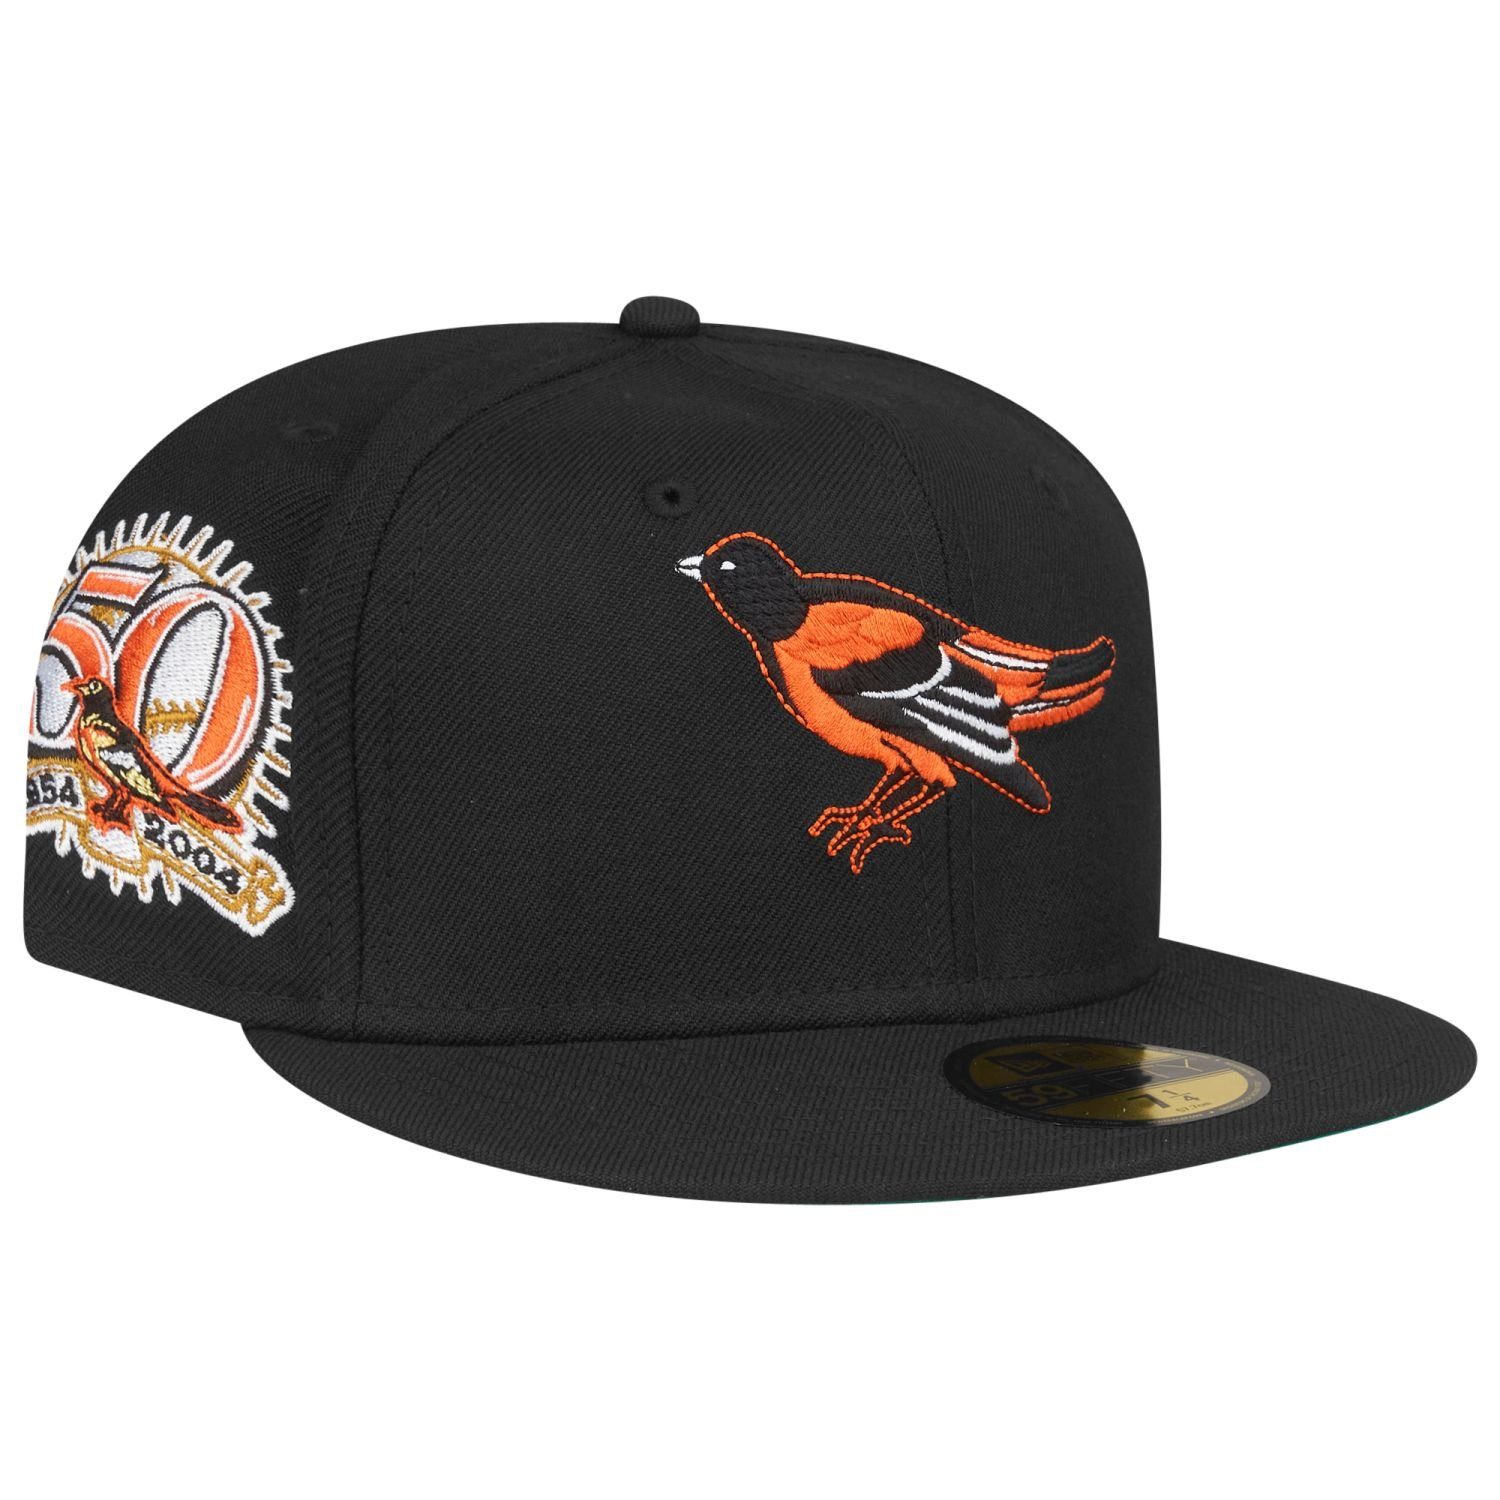 New Era Fitted Cap 59Fifty COOPERSTOWN Baltimore Orioles | Fitted Caps